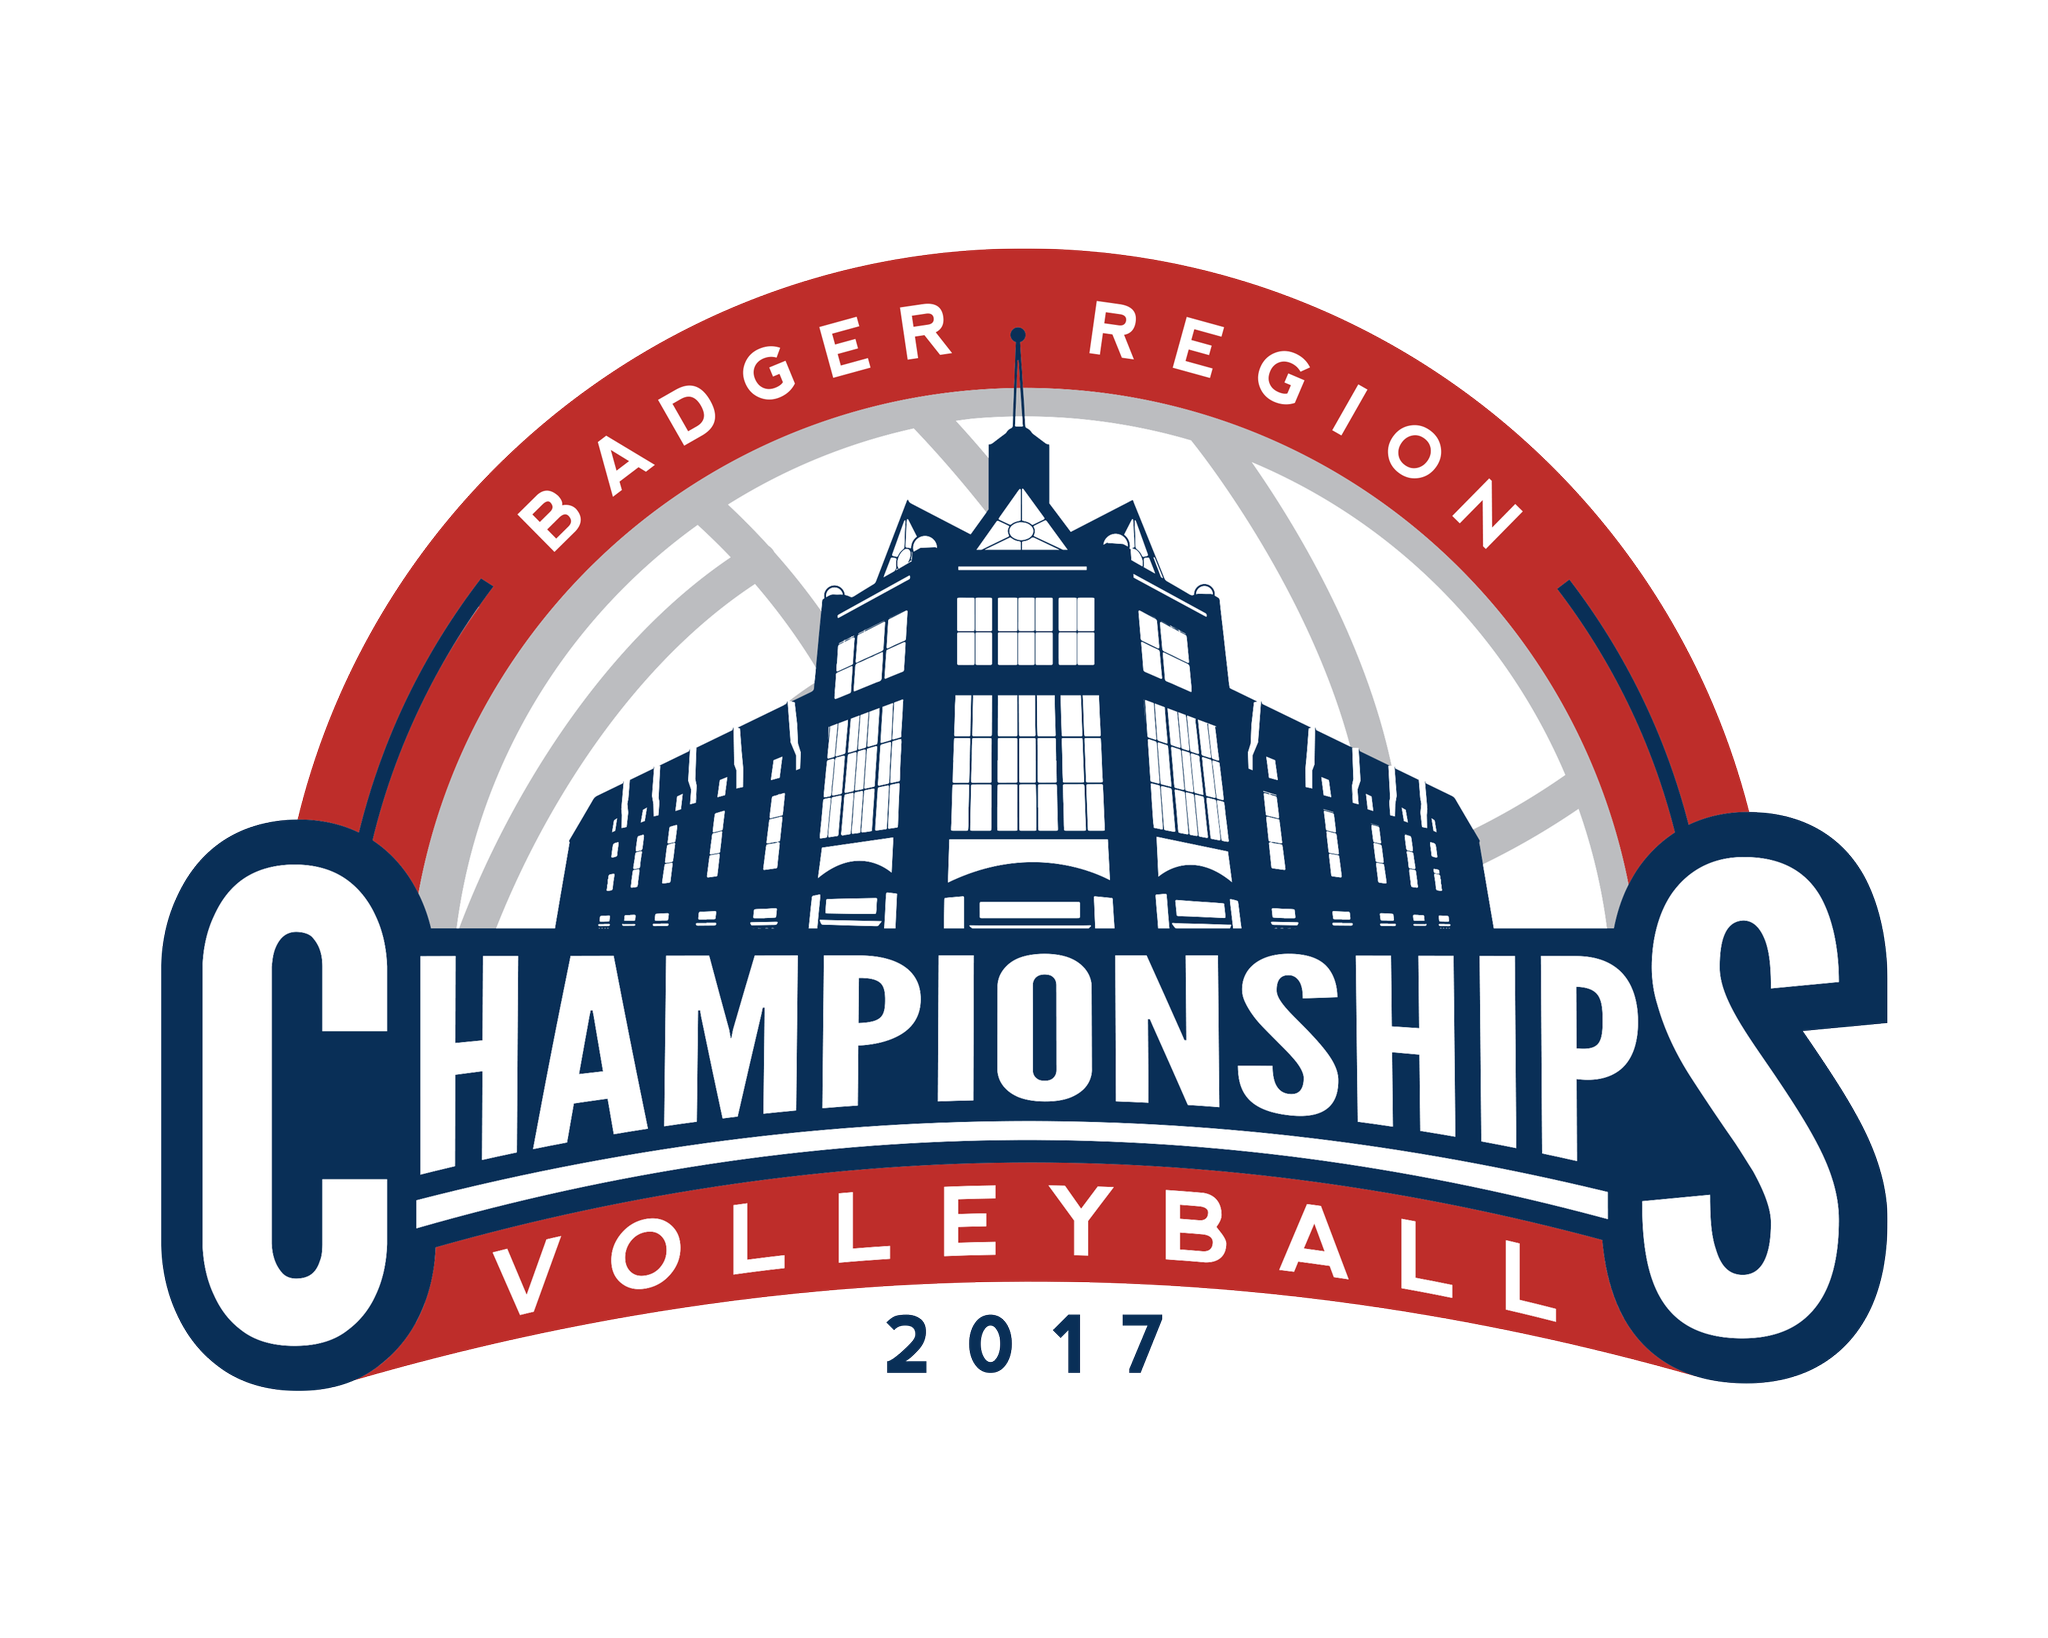 Badger Region Vball on Twitter "Details about the Region Championships